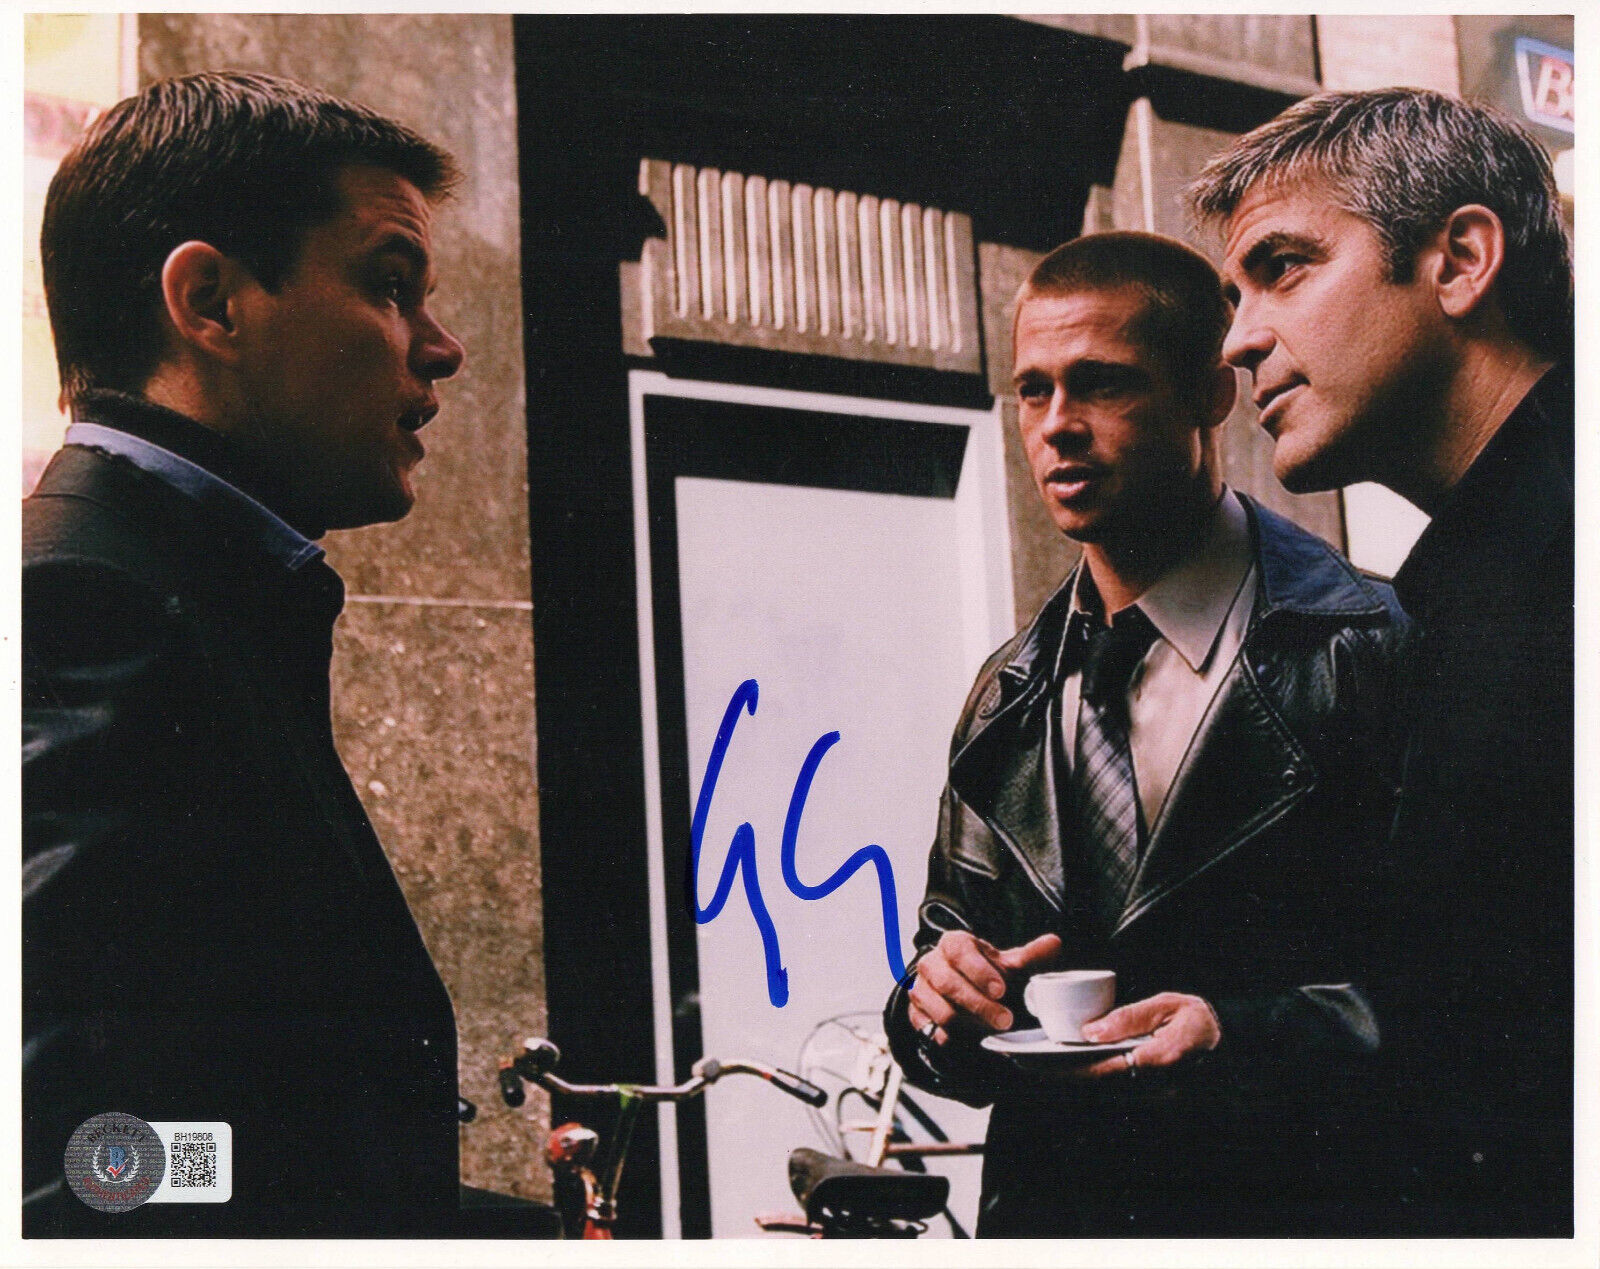 GEORGE CLOONEY SIGNED AUTO OCEAN'S ELEVEN 8X10 PHOTO BECKETT BAS